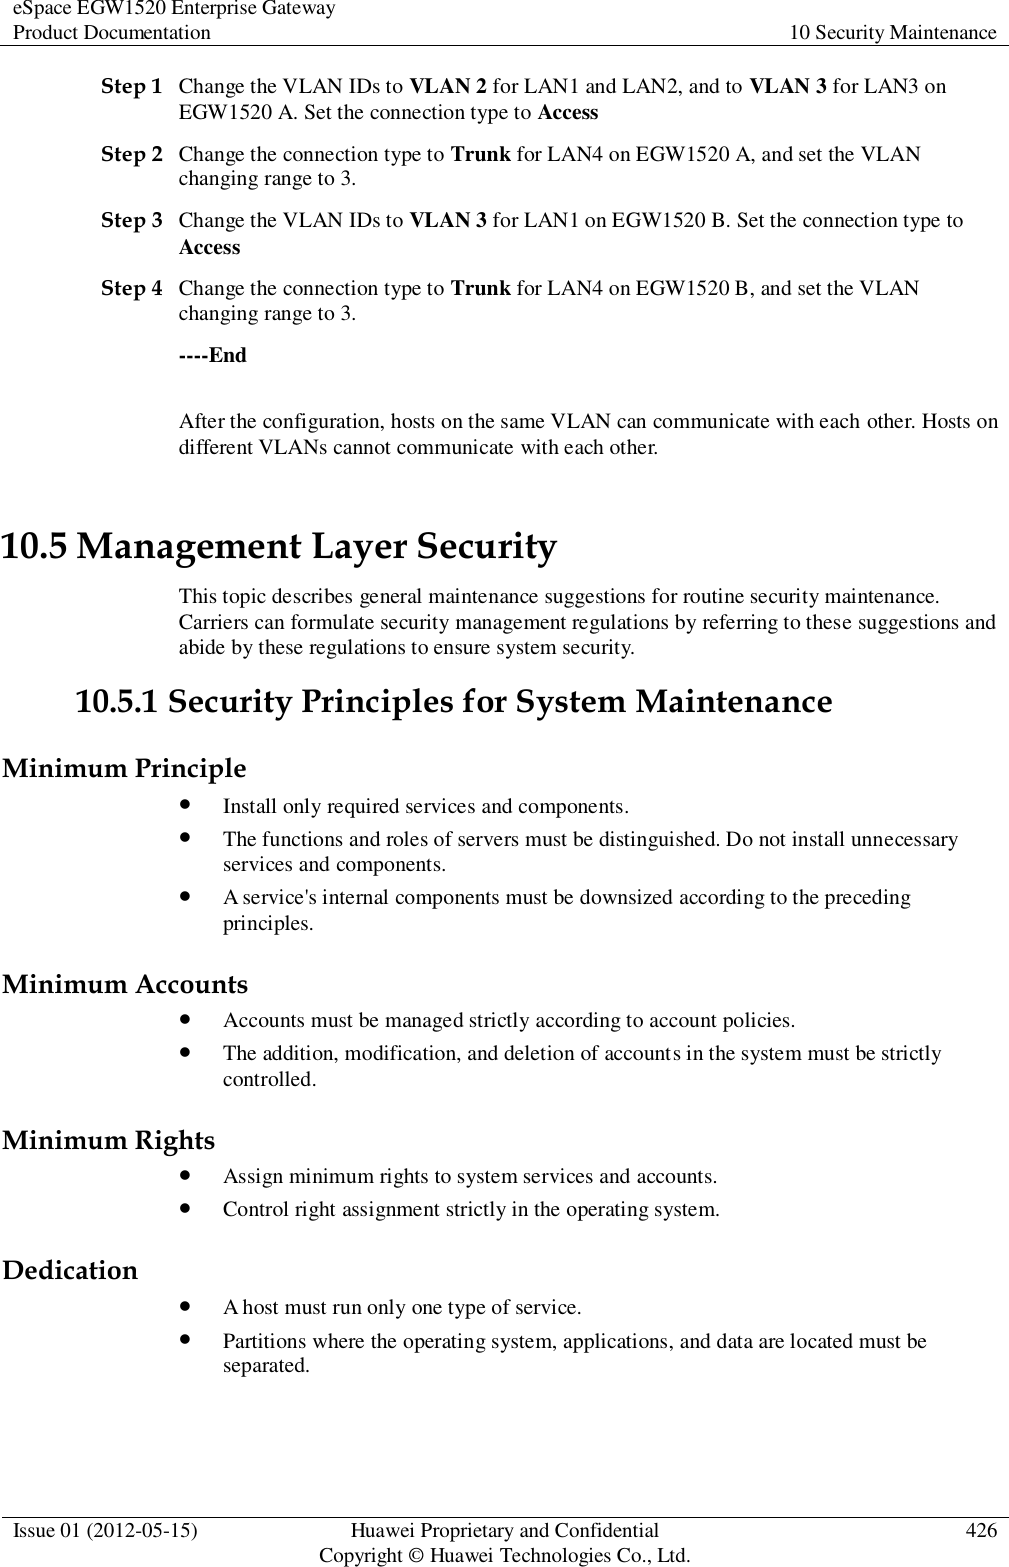 eSpace EGW1520 Enterprise Gateway Product Documentation 10 Security Maintenance  Issue 01 (2012-05-15) Huawei Proprietary and Confidential                                     Copyright © Huawei Technologies Co., Ltd. 426  Step 1 Change the VLAN IDs to VLAN 2 for LAN1 and LAN2, and to VLAN 3 for LAN3 on EGW1520 A. Set the connection type to Access Step 2 Change the connection type to Trunk for LAN4 on EGW1520 A, and set the VLAN changing range to 3. Step 3 Change the VLAN IDs to VLAN 3 for LAN1 on EGW1520 B. Set the connection type to Access Step 4 Change the connection type to Trunk for LAN4 on EGW1520 B, and set the VLAN changing range to 3. ----End After the configuration, hosts on the same VLAN can communicate with each other. Hosts on different VLANs cannot communicate with each other. 10.5 Management Layer Security This topic describes general maintenance suggestions for routine security maintenance. Carriers can formulate security management regulations by referring to these suggestions and abide by these regulations to ensure system security. 10.5.1 Security Principles for System Maintenance Minimum Principle  Install only required services and components.  The functions and roles of servers must be distinguished. Do not install unnecessary services and components.  A service&apos;s internal components must be downsized according to the preceding principles. Minimum Accounts  Accounts must be managed strictly according to account policies.  The addition, modification, and deletion of accounts in the system must be strictly controlled. Minimum Rights  Assign minimum rights to system services and accounts.  Control right assignment strictly in the operating system. Dedication  A host must run only one type of service.  Partitions where the operating system, applications, and data are located must be separated. 